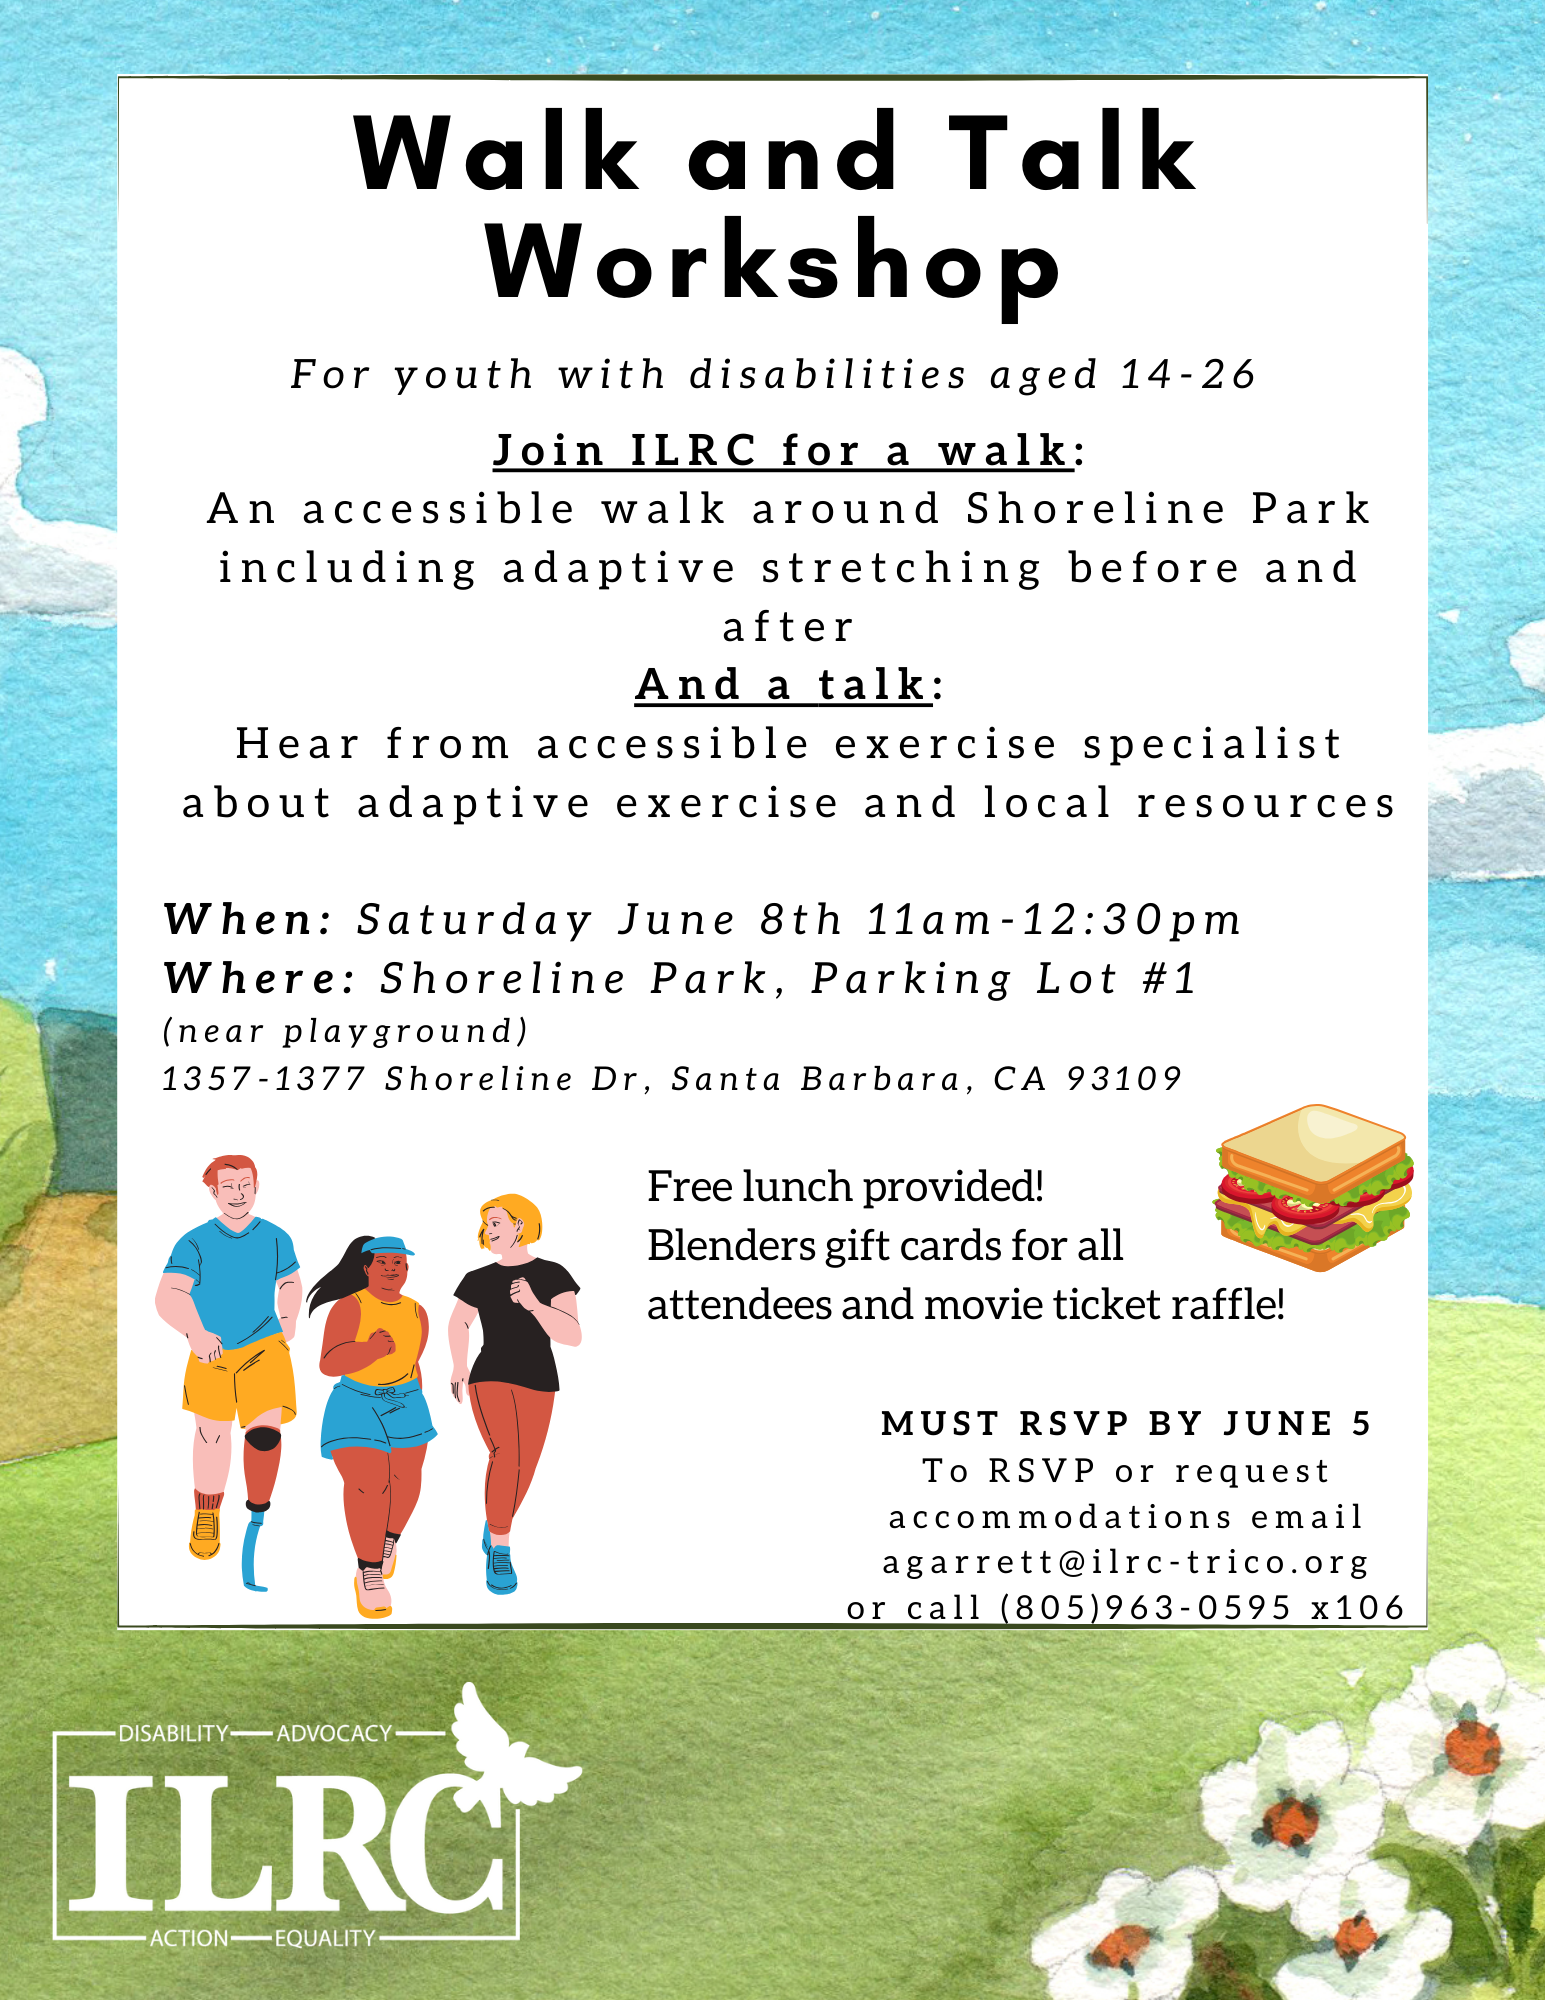 For Youth With Disabilities aged 14-26 

Join ILRC for a walk: An accessible walk around Shoreline Park, including adaptive stretching before and after. 
And a talk: Hear from accessible specialist about adaptive exercise and local resources 

When: Saturday, June 8th 11 am-12:30 pm 
Where: Shoreline Park, Parking Lot #1 (near playground) 

Free lunch provided! 
Blenders gift cards for all attendees and movie ticket raffle!

Must RSVP by June 5th. 

To RVSP and/or request accommodations, please email agarrett@ilrc-trico.org or call (805) 963-0595 x106